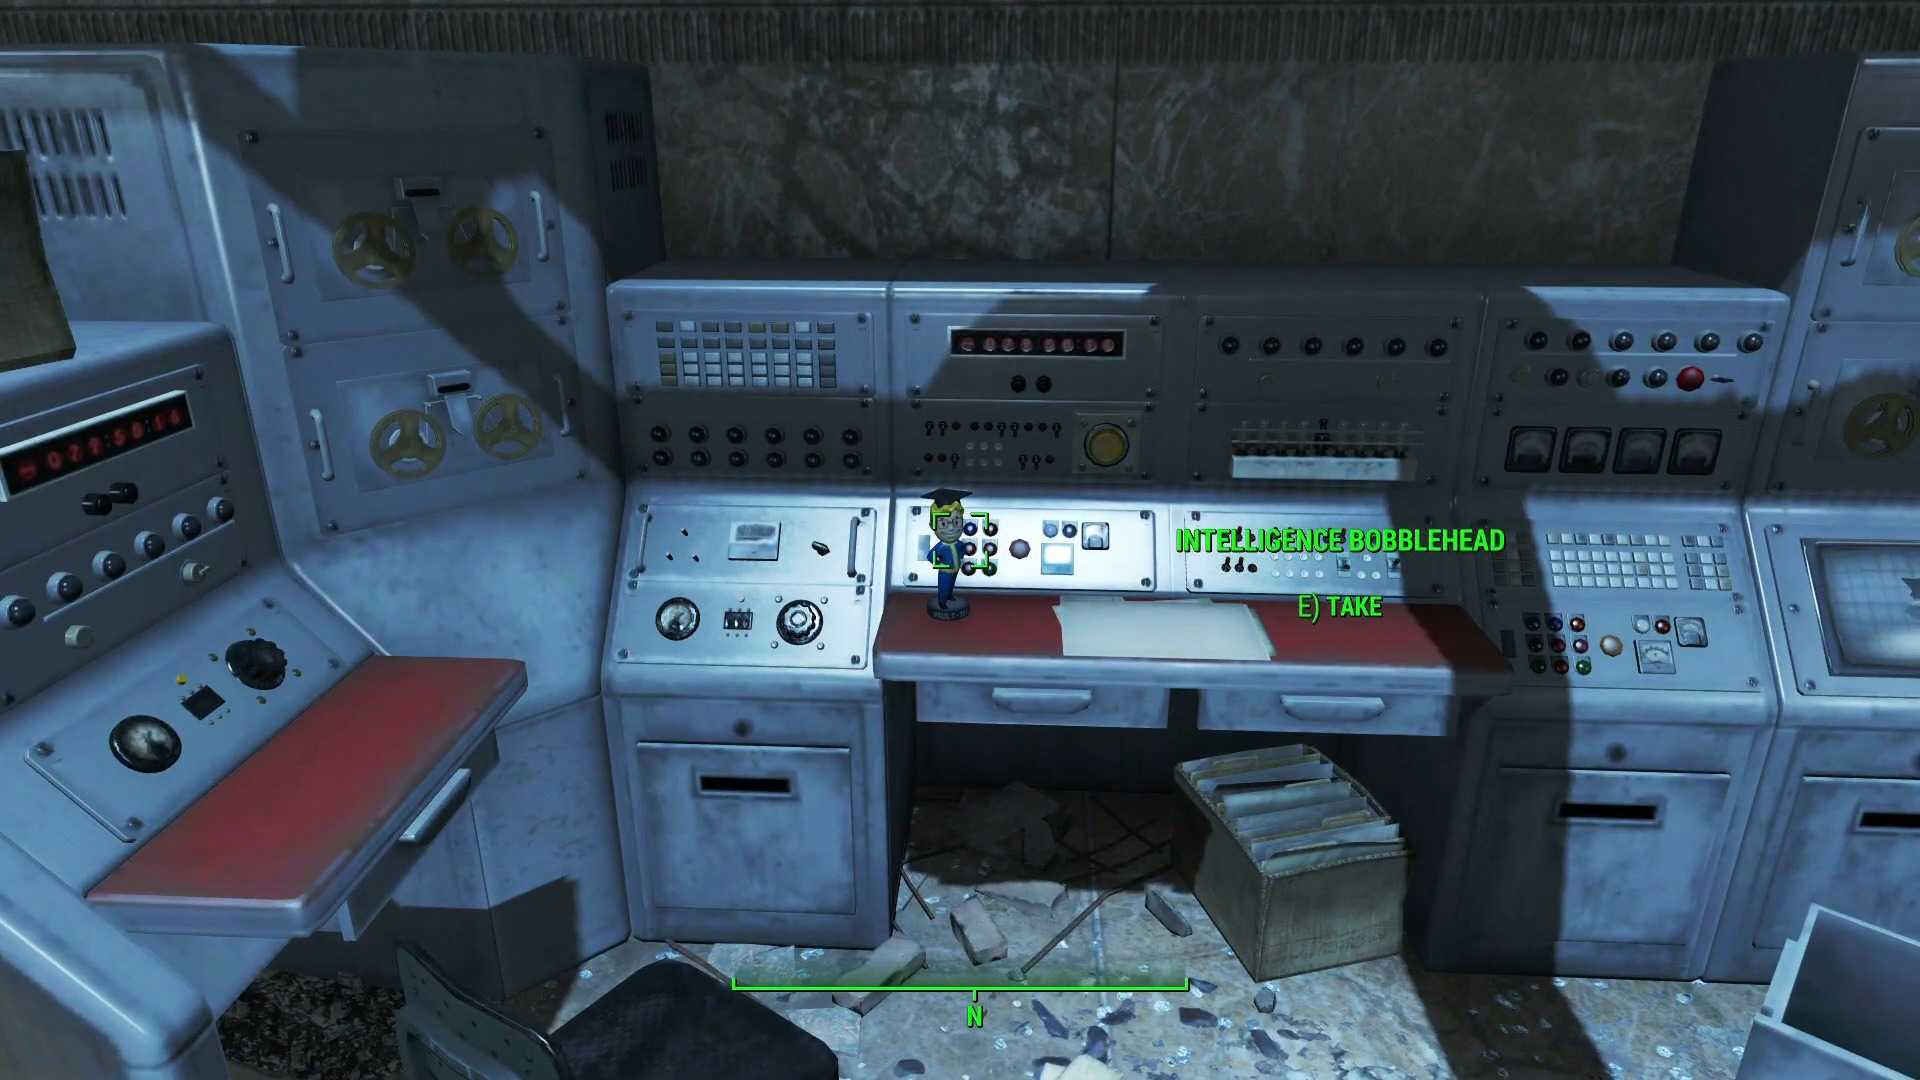 The Intelligence Bobblehead in Fallout 4